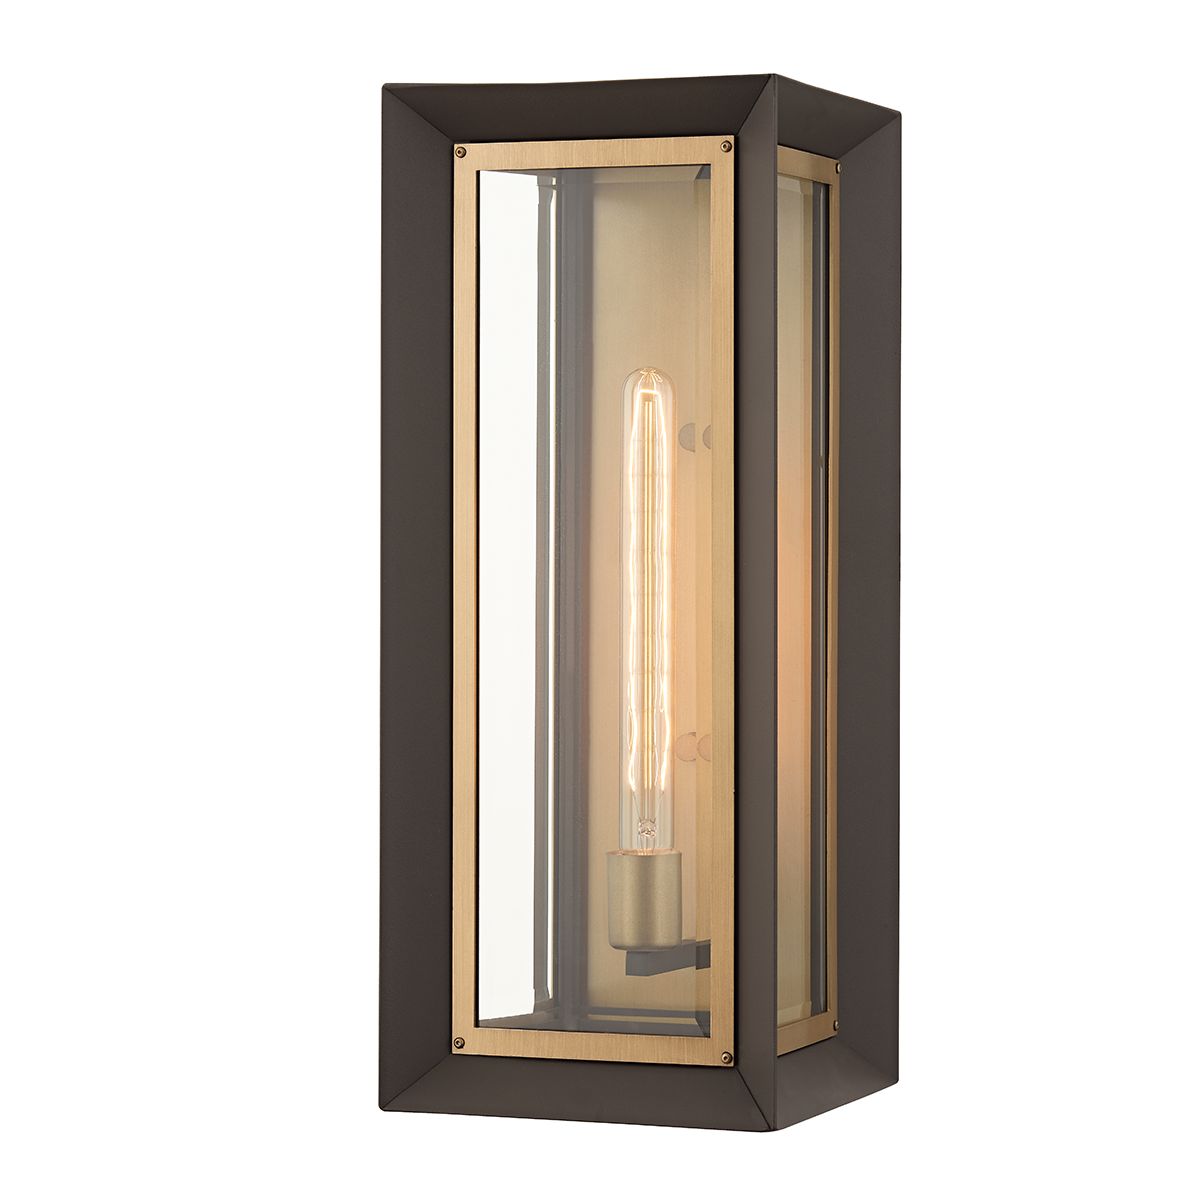 LOWRY 21 in. Outdoor Wall Sconce Textured Bronze Finish